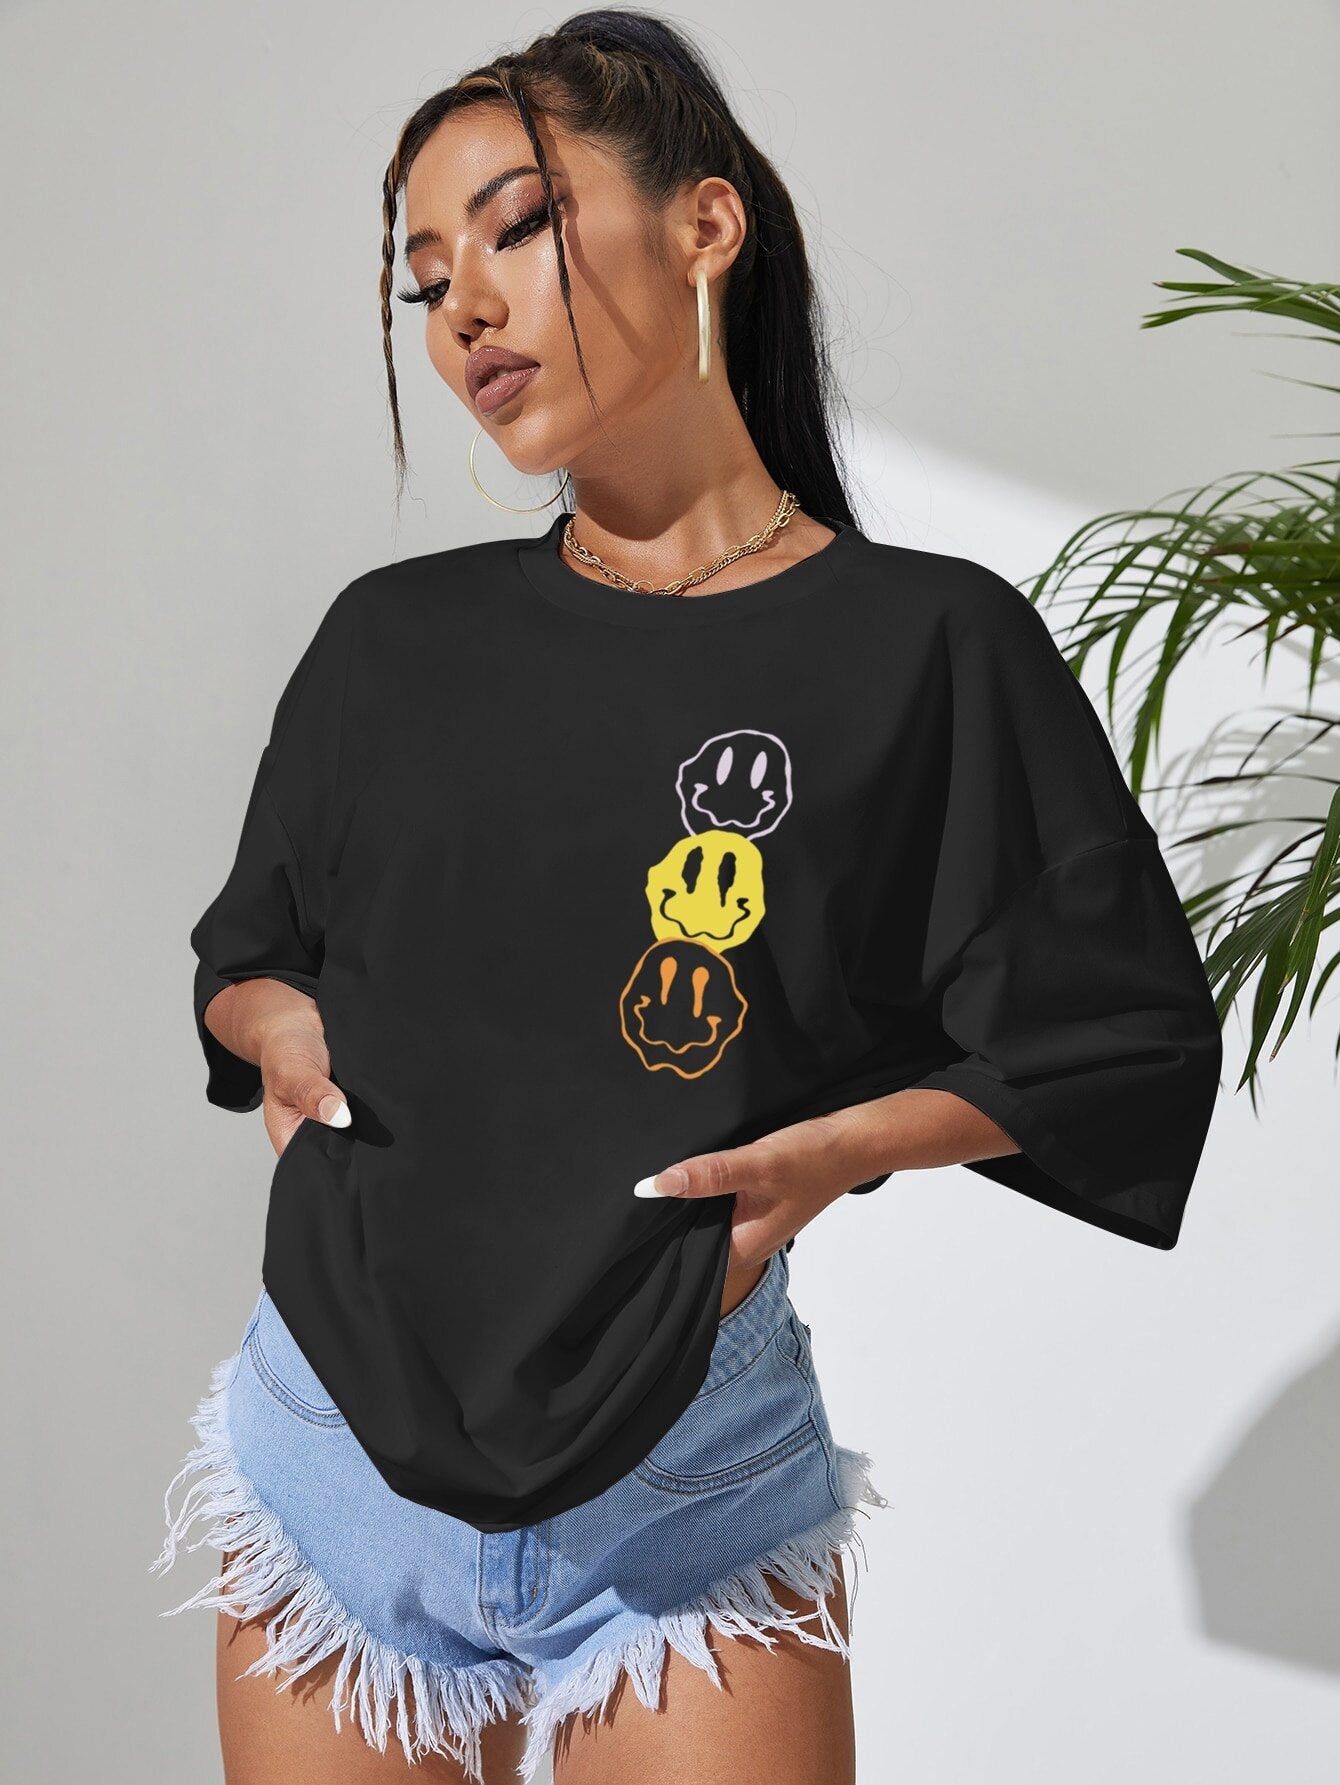 Expressive Emotions: Unhappy Face Tee